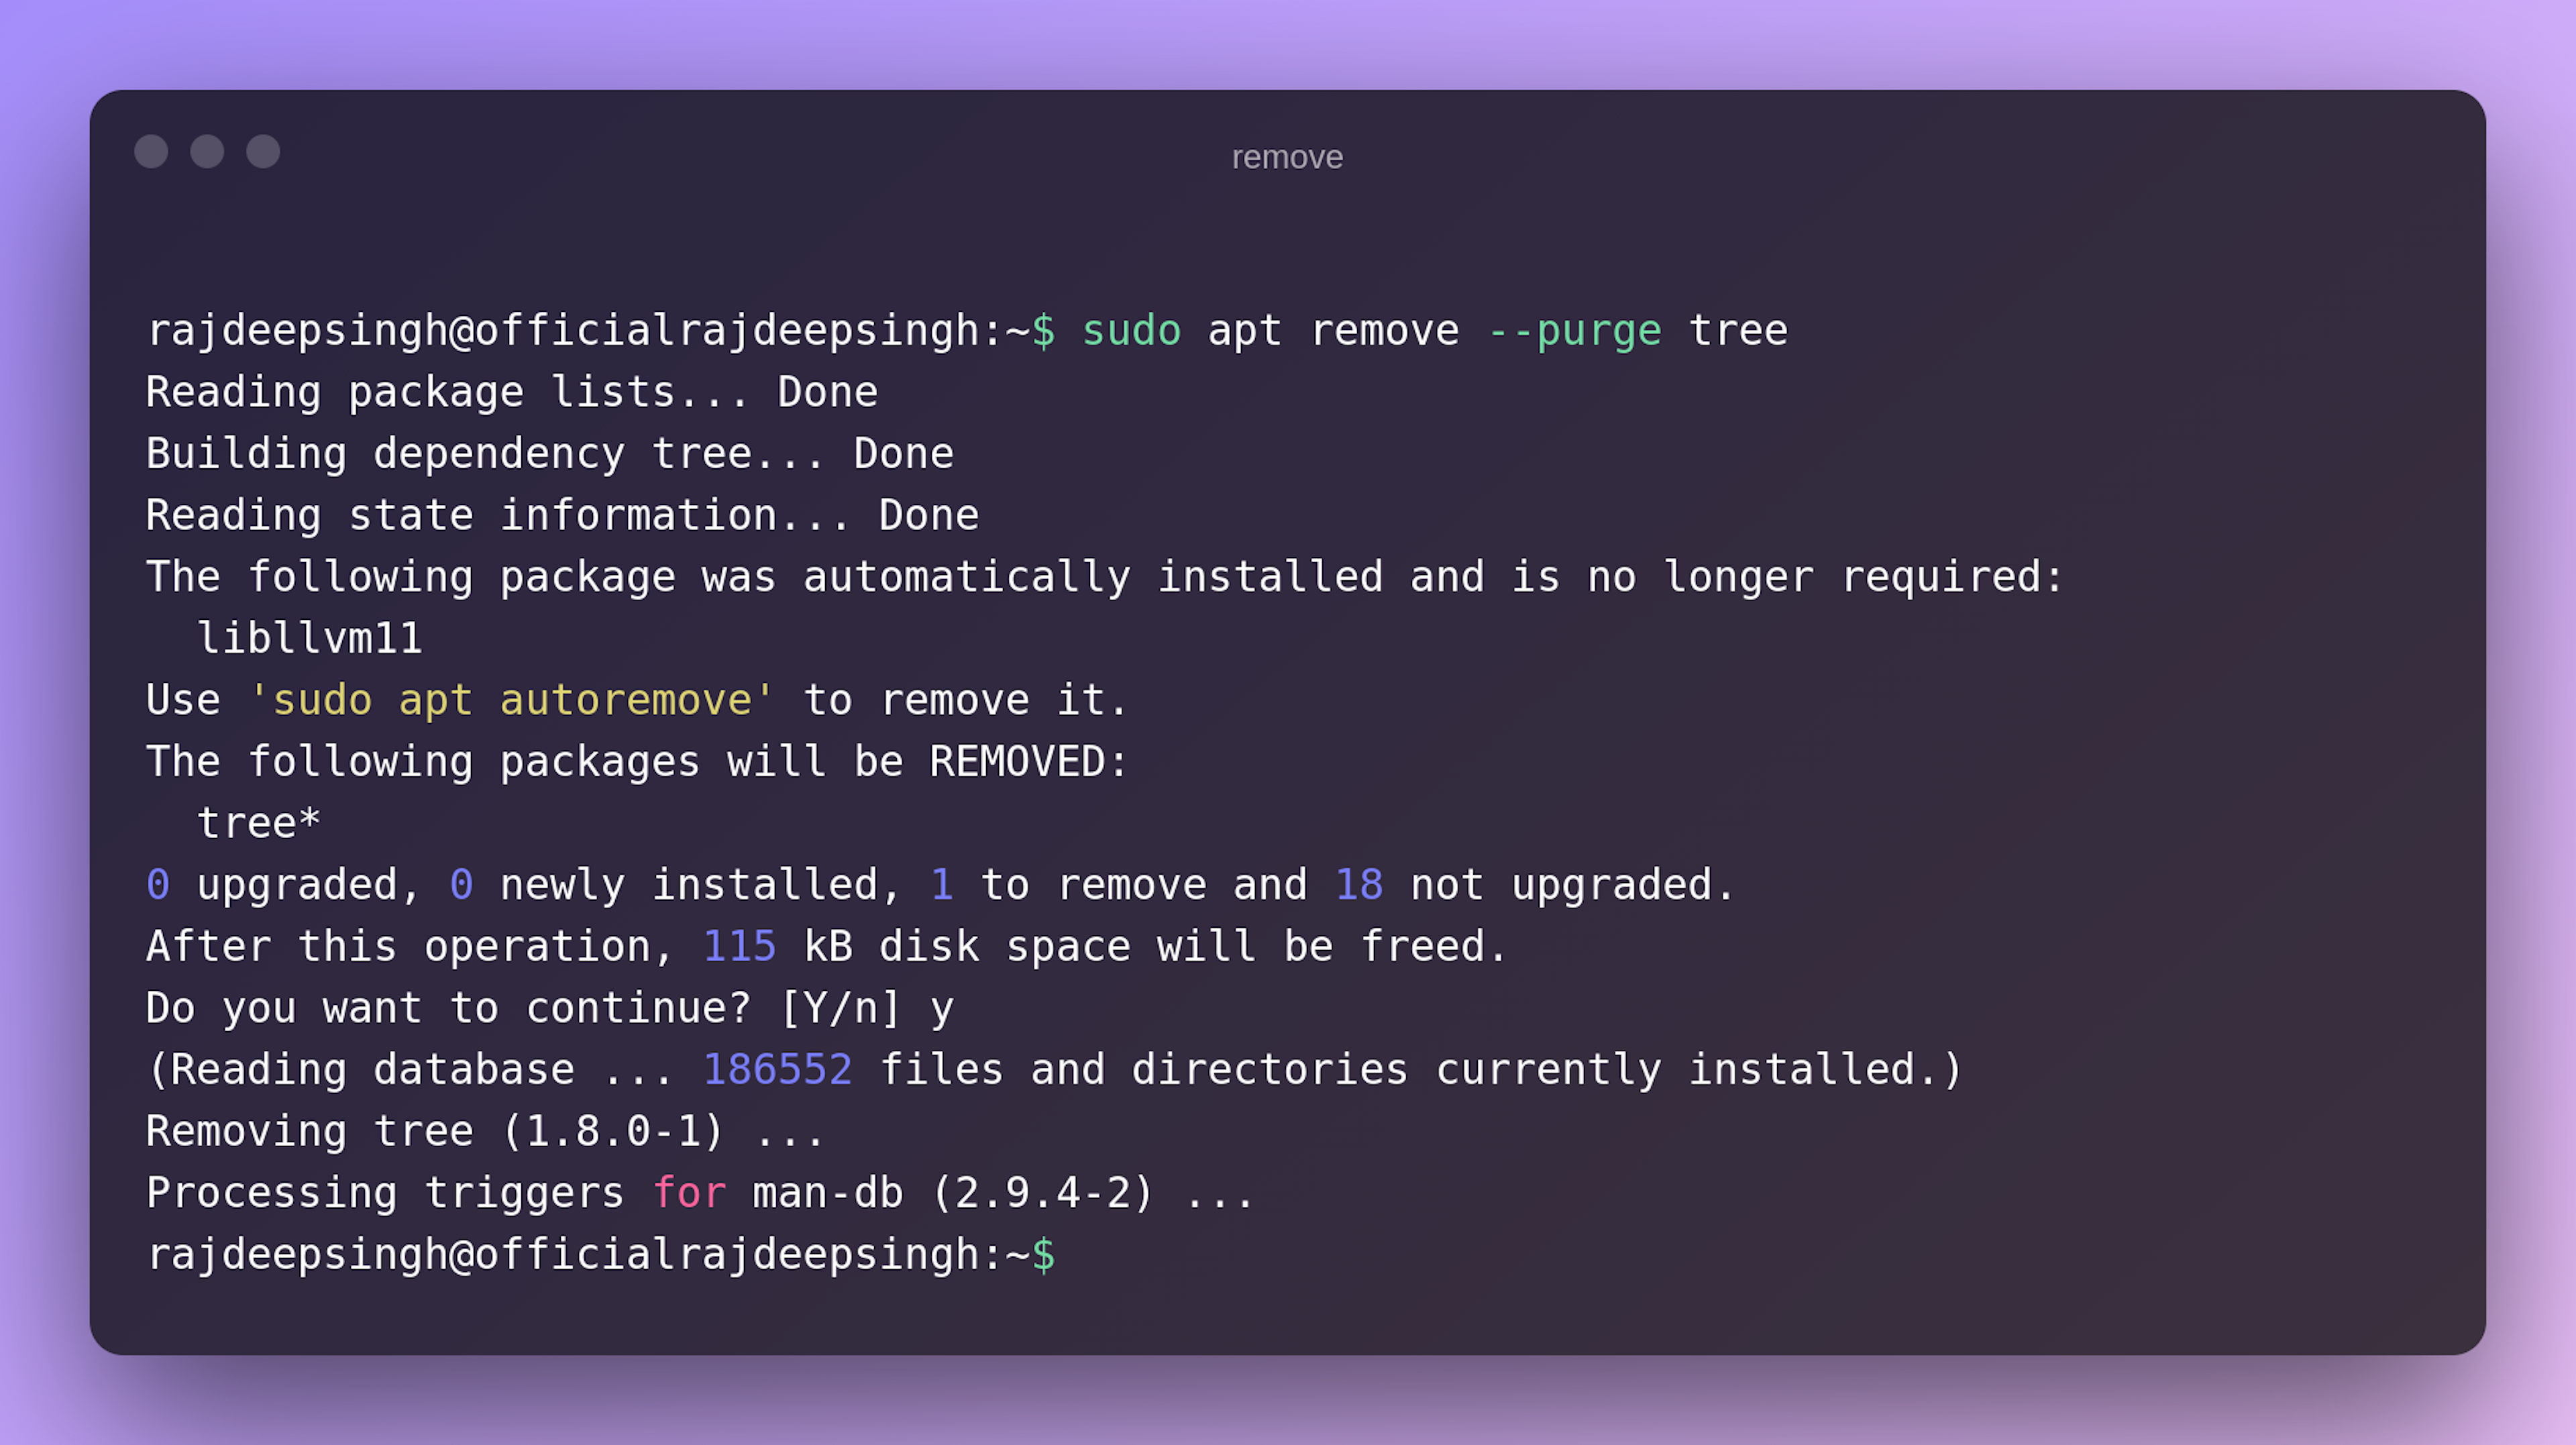 remove tree command in your system